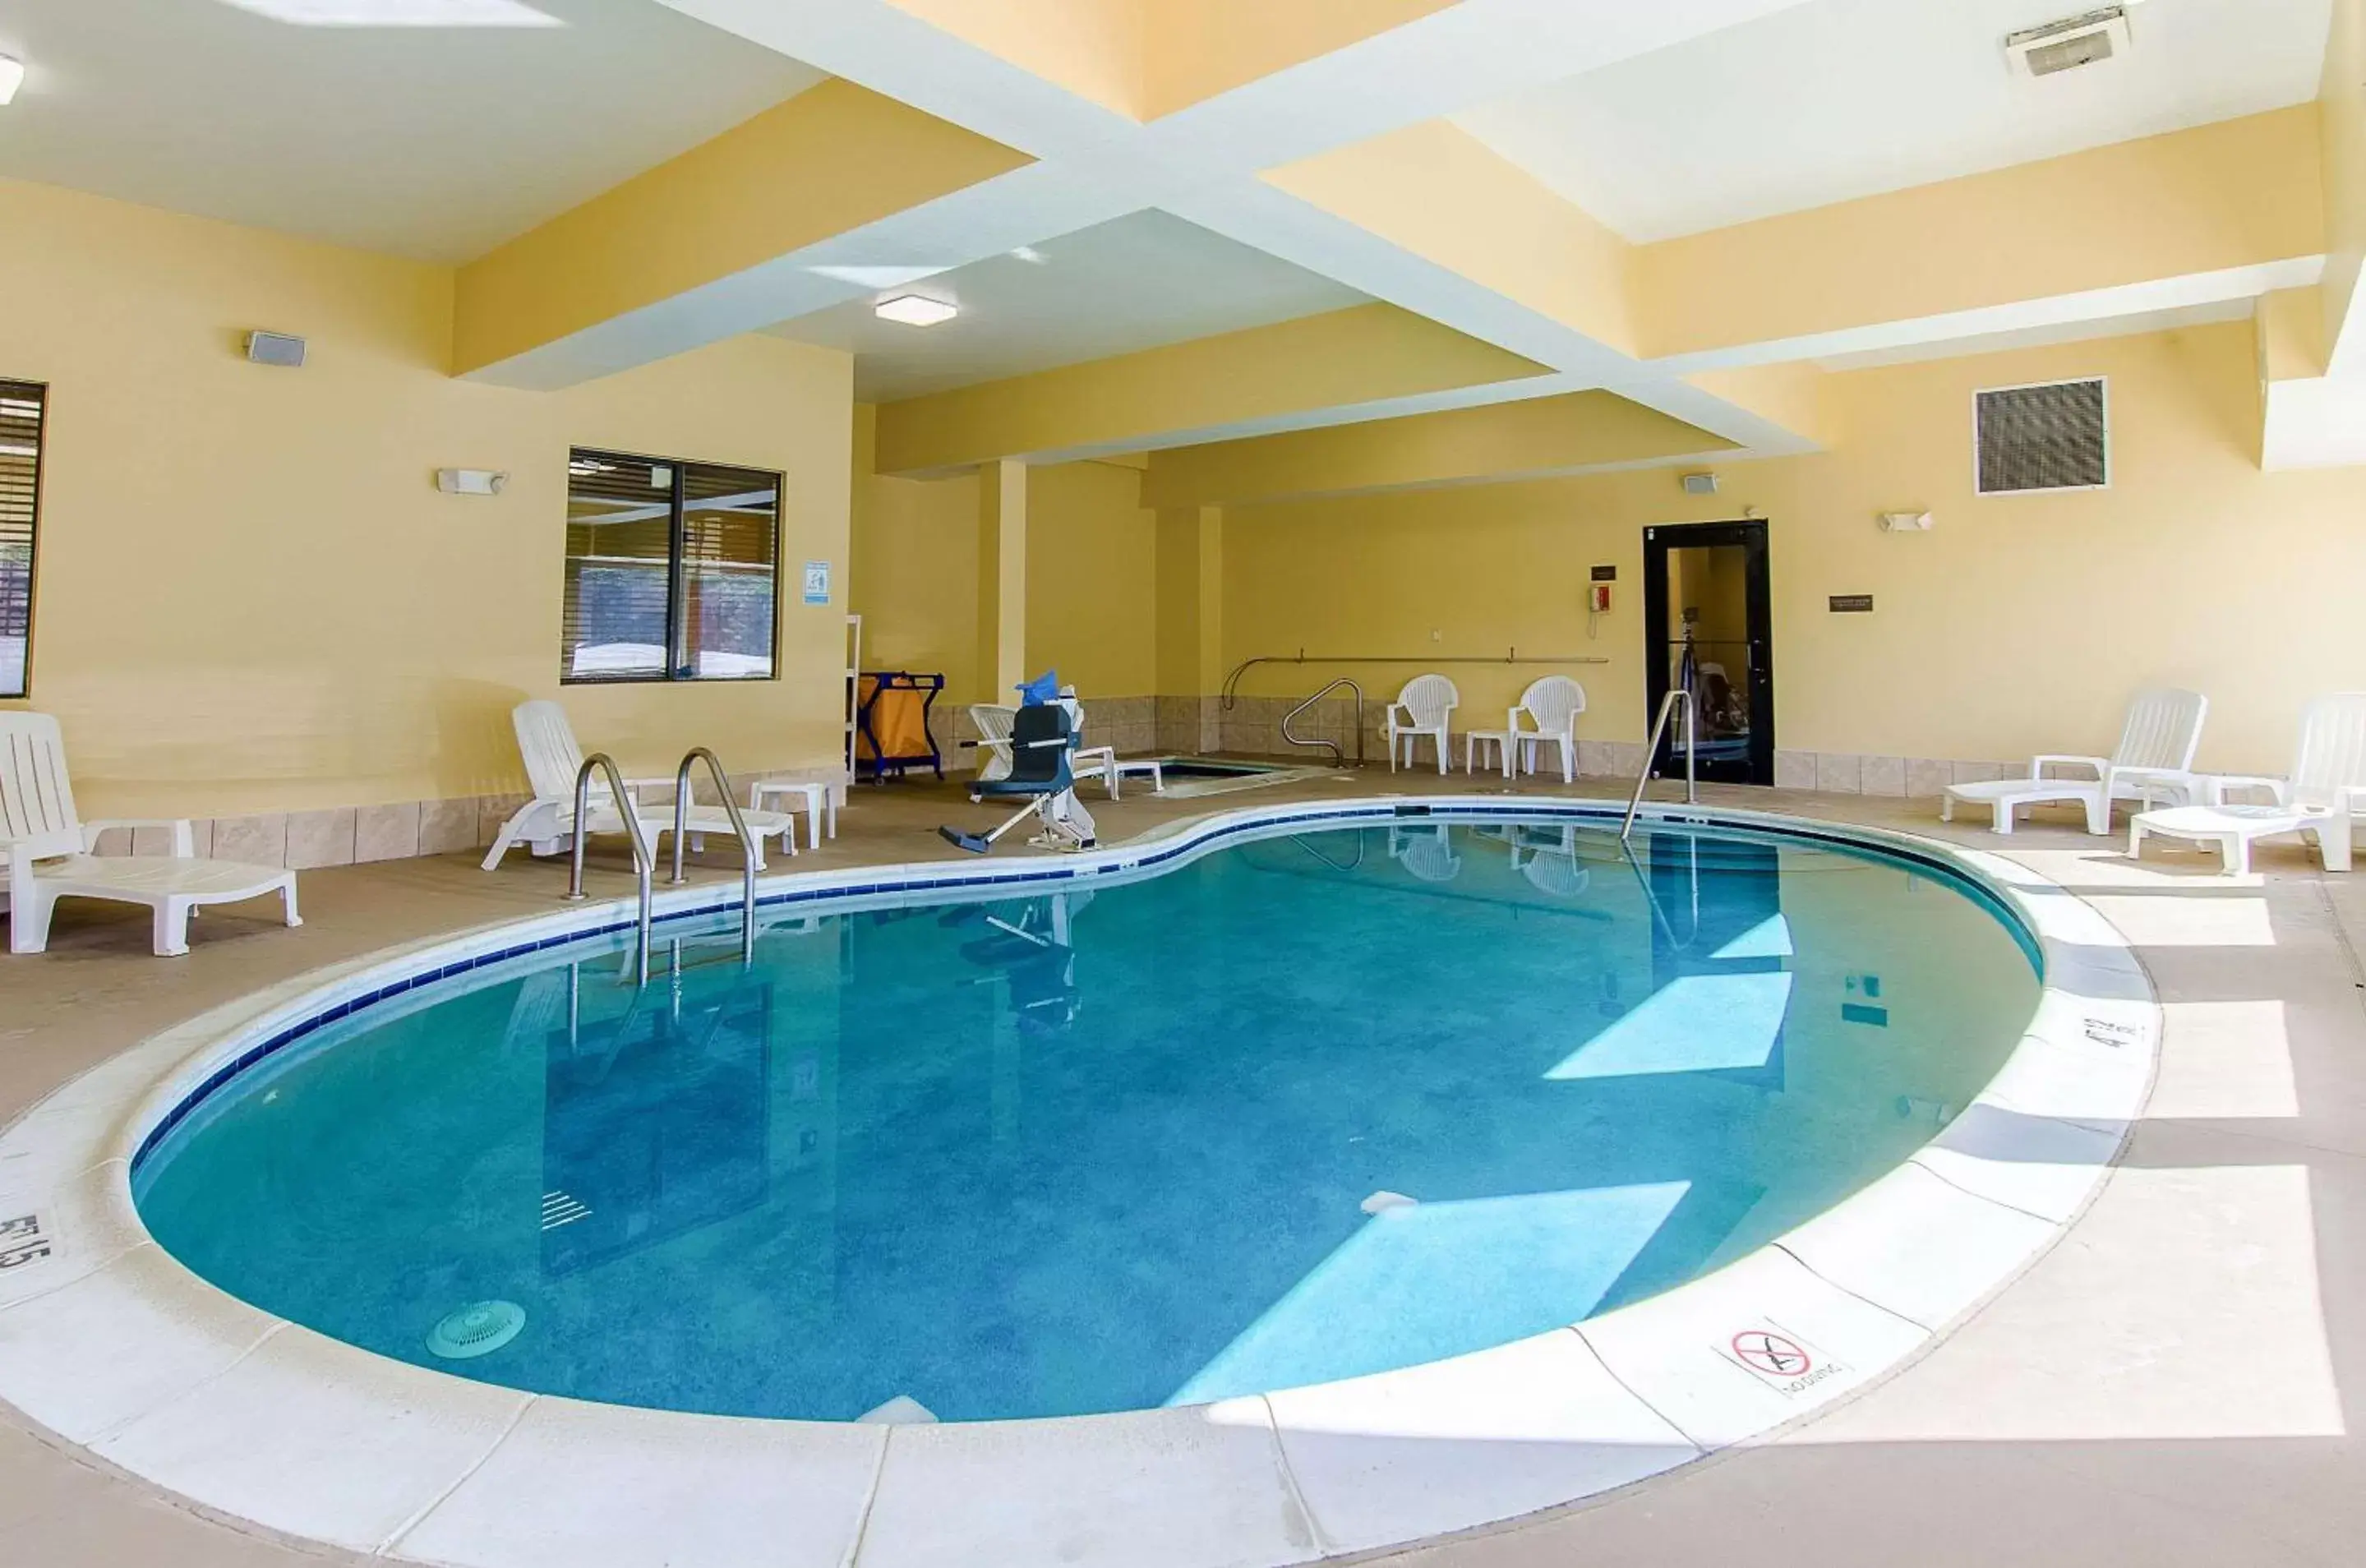 On site, Swimming Pool in Comfort Suites Wytheville